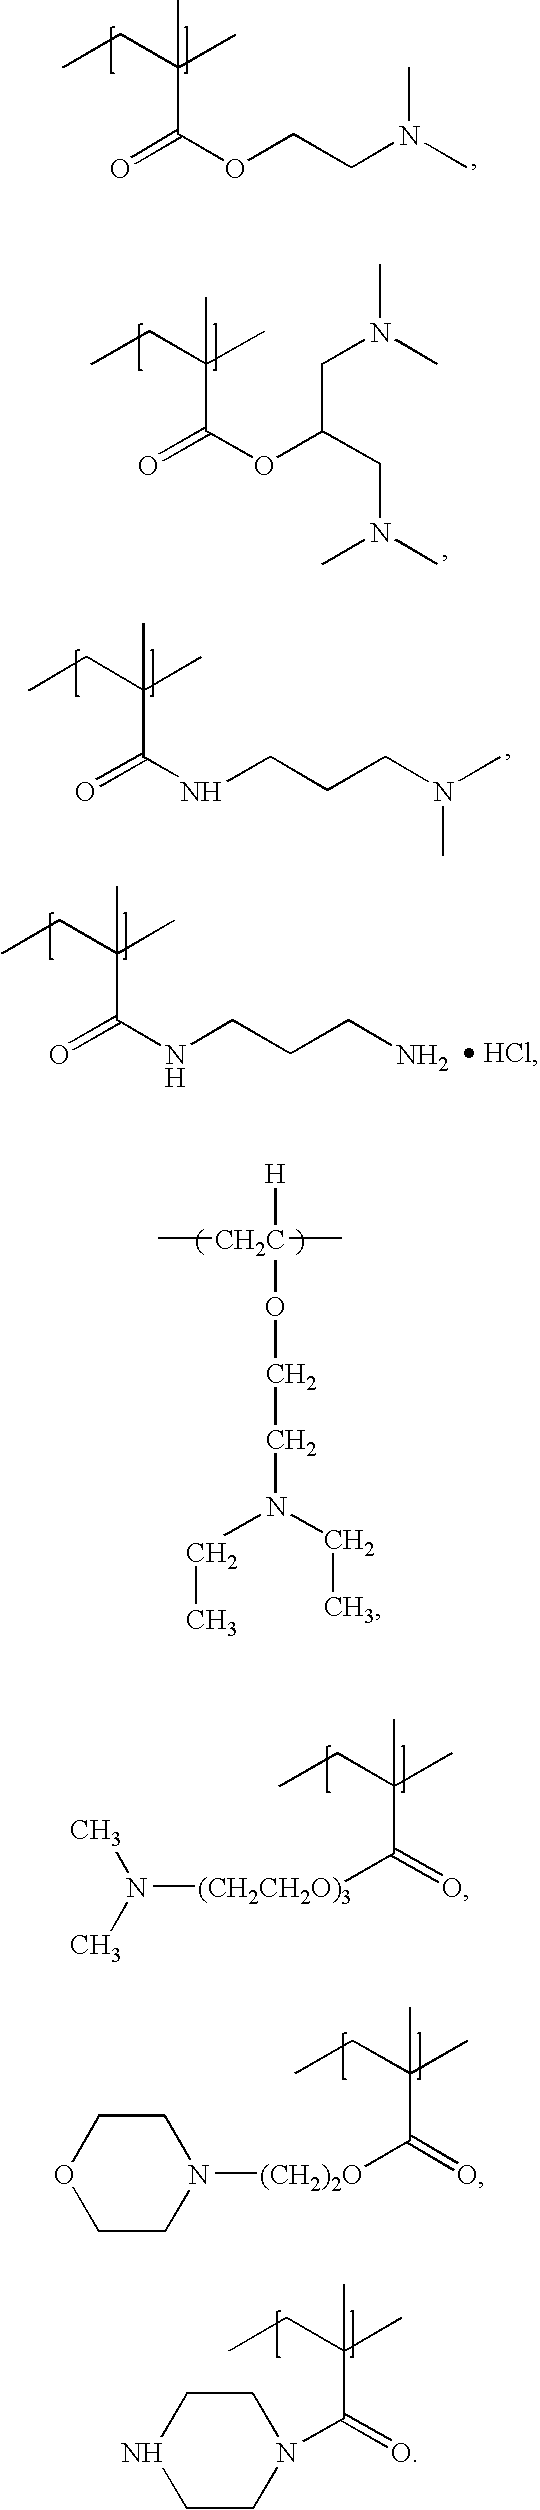 Polymers, compositions and methods of use for foams, laundry detergents, shower rinses, and coagulants